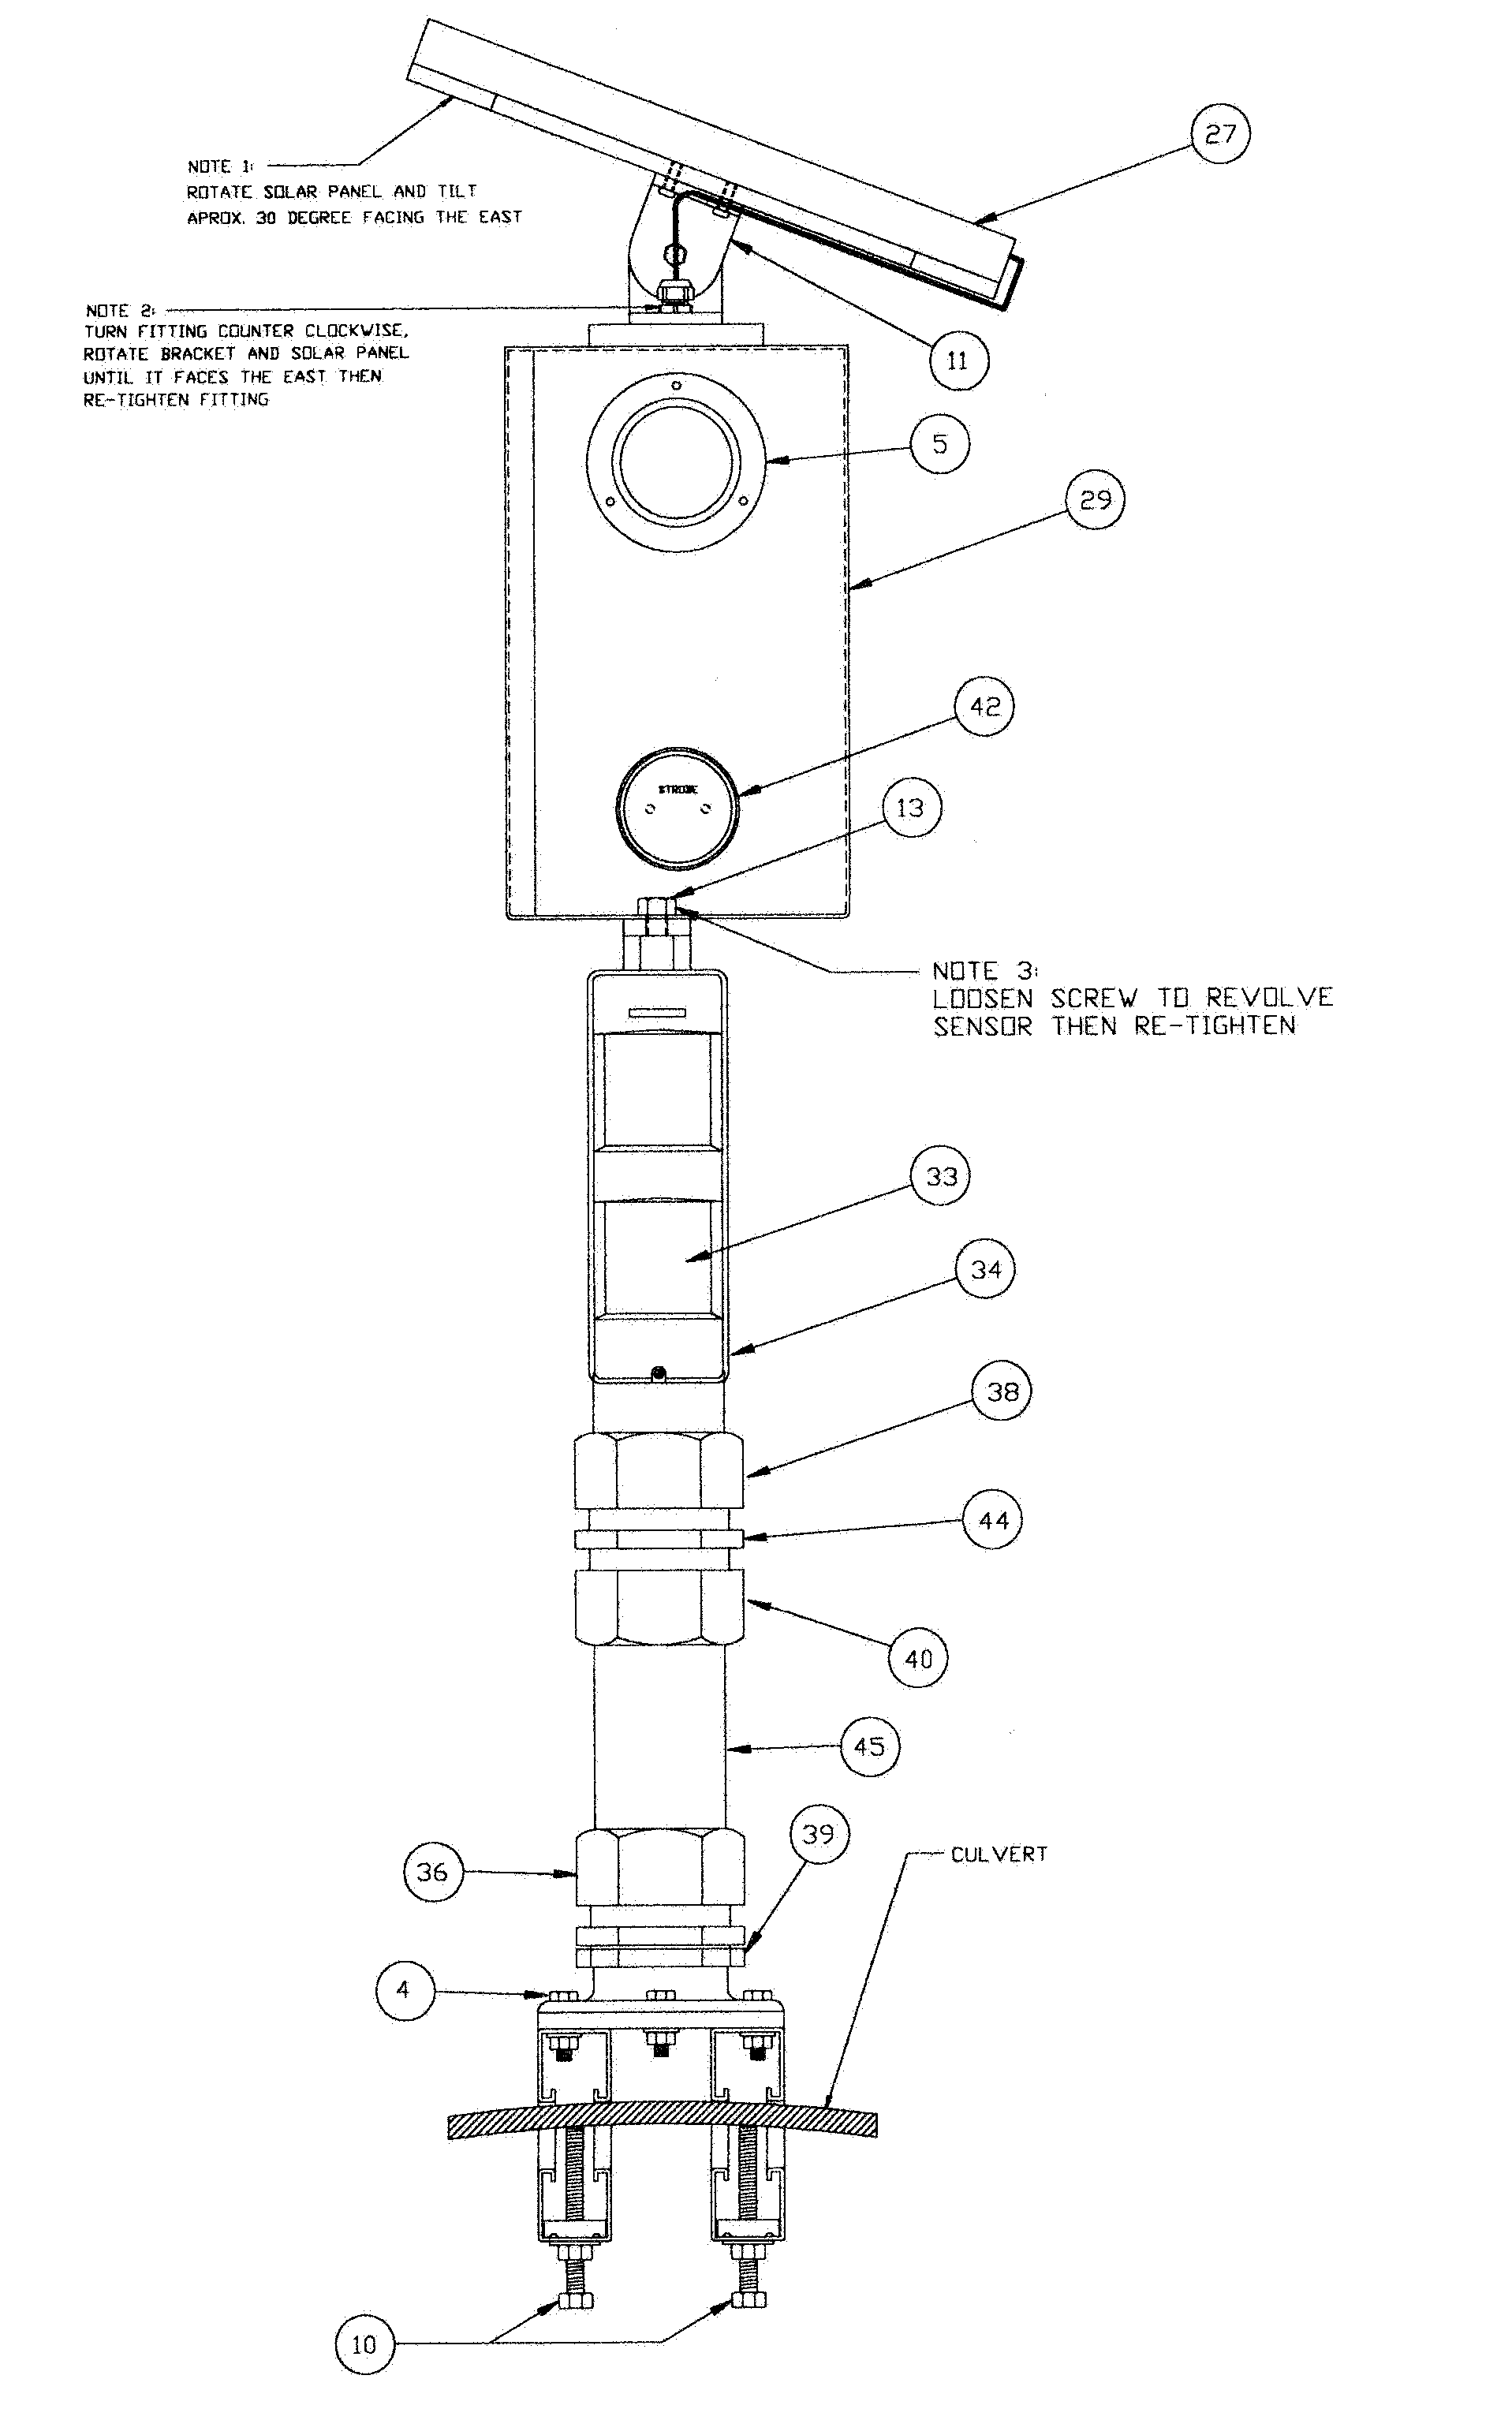 Animal deterrent apparatus for mounting to a culvert